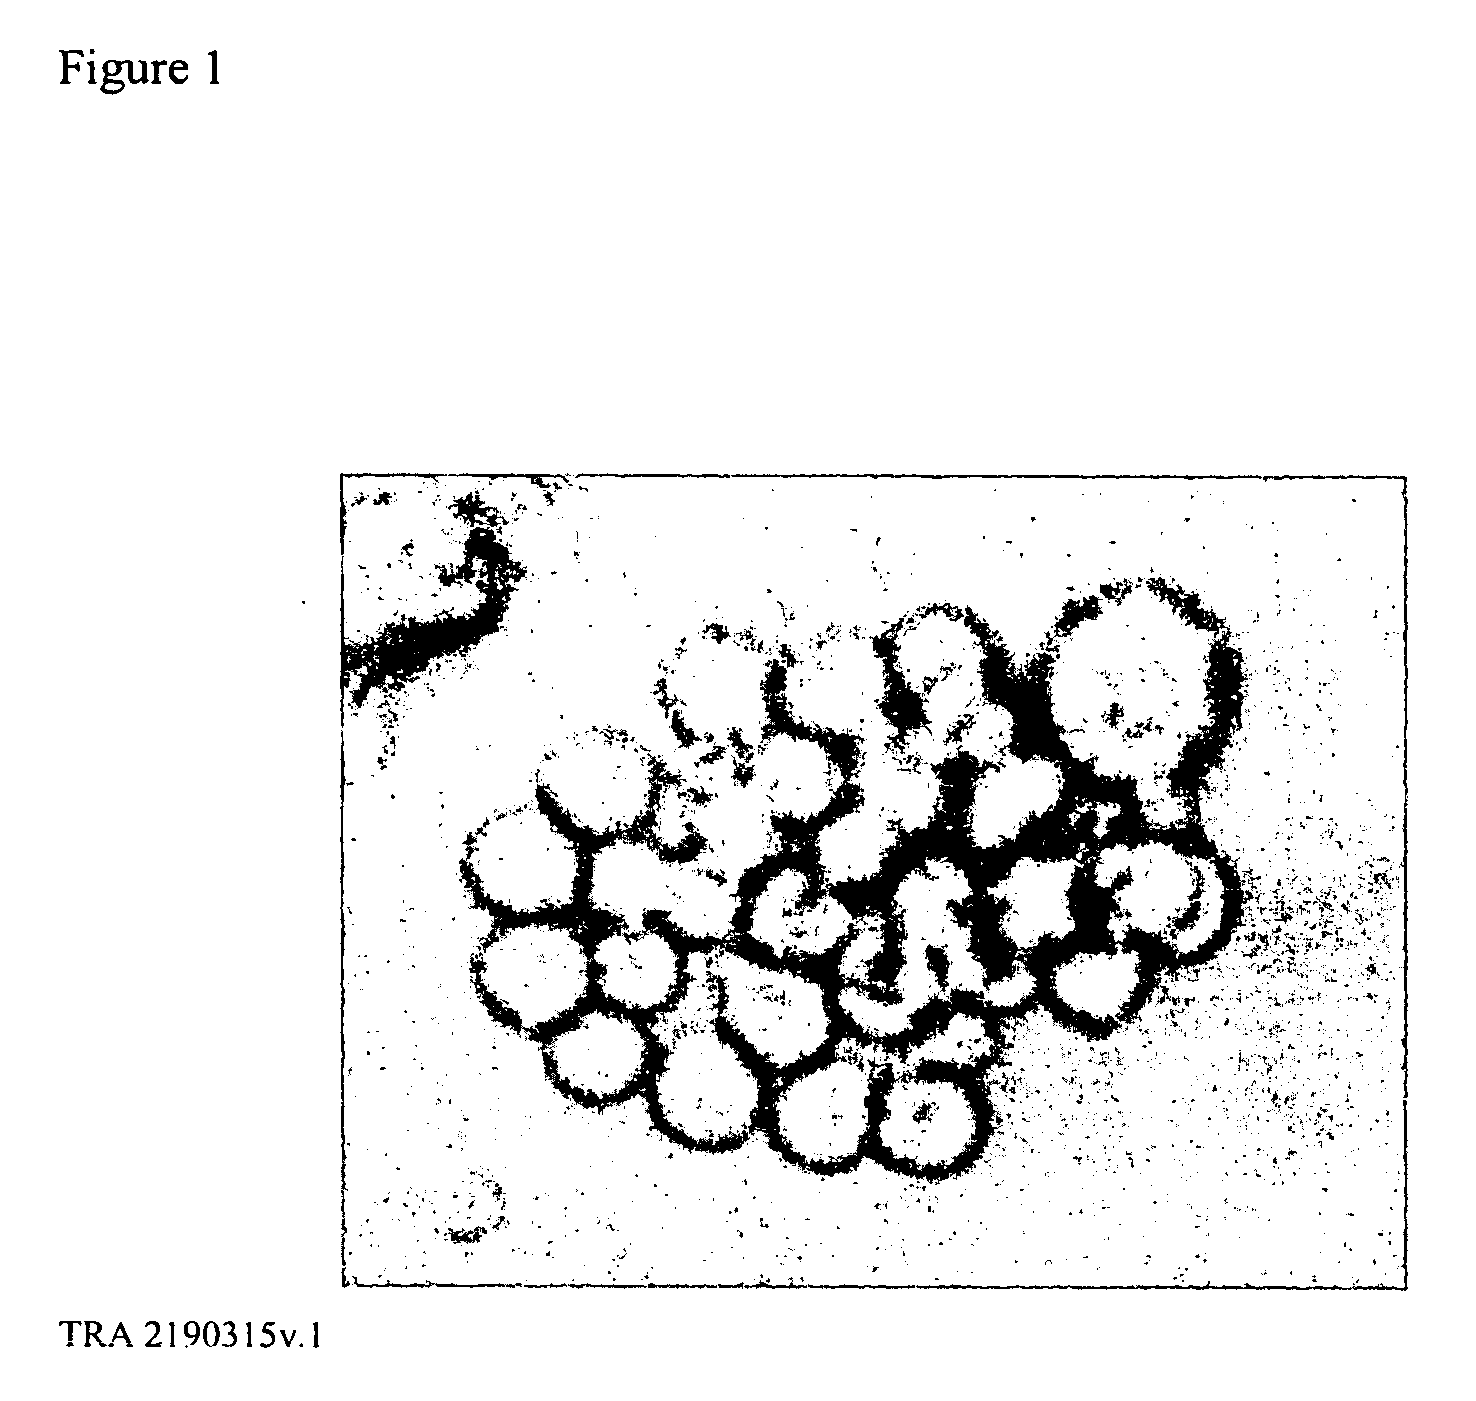 Methods of producing stable B-lymphocytes